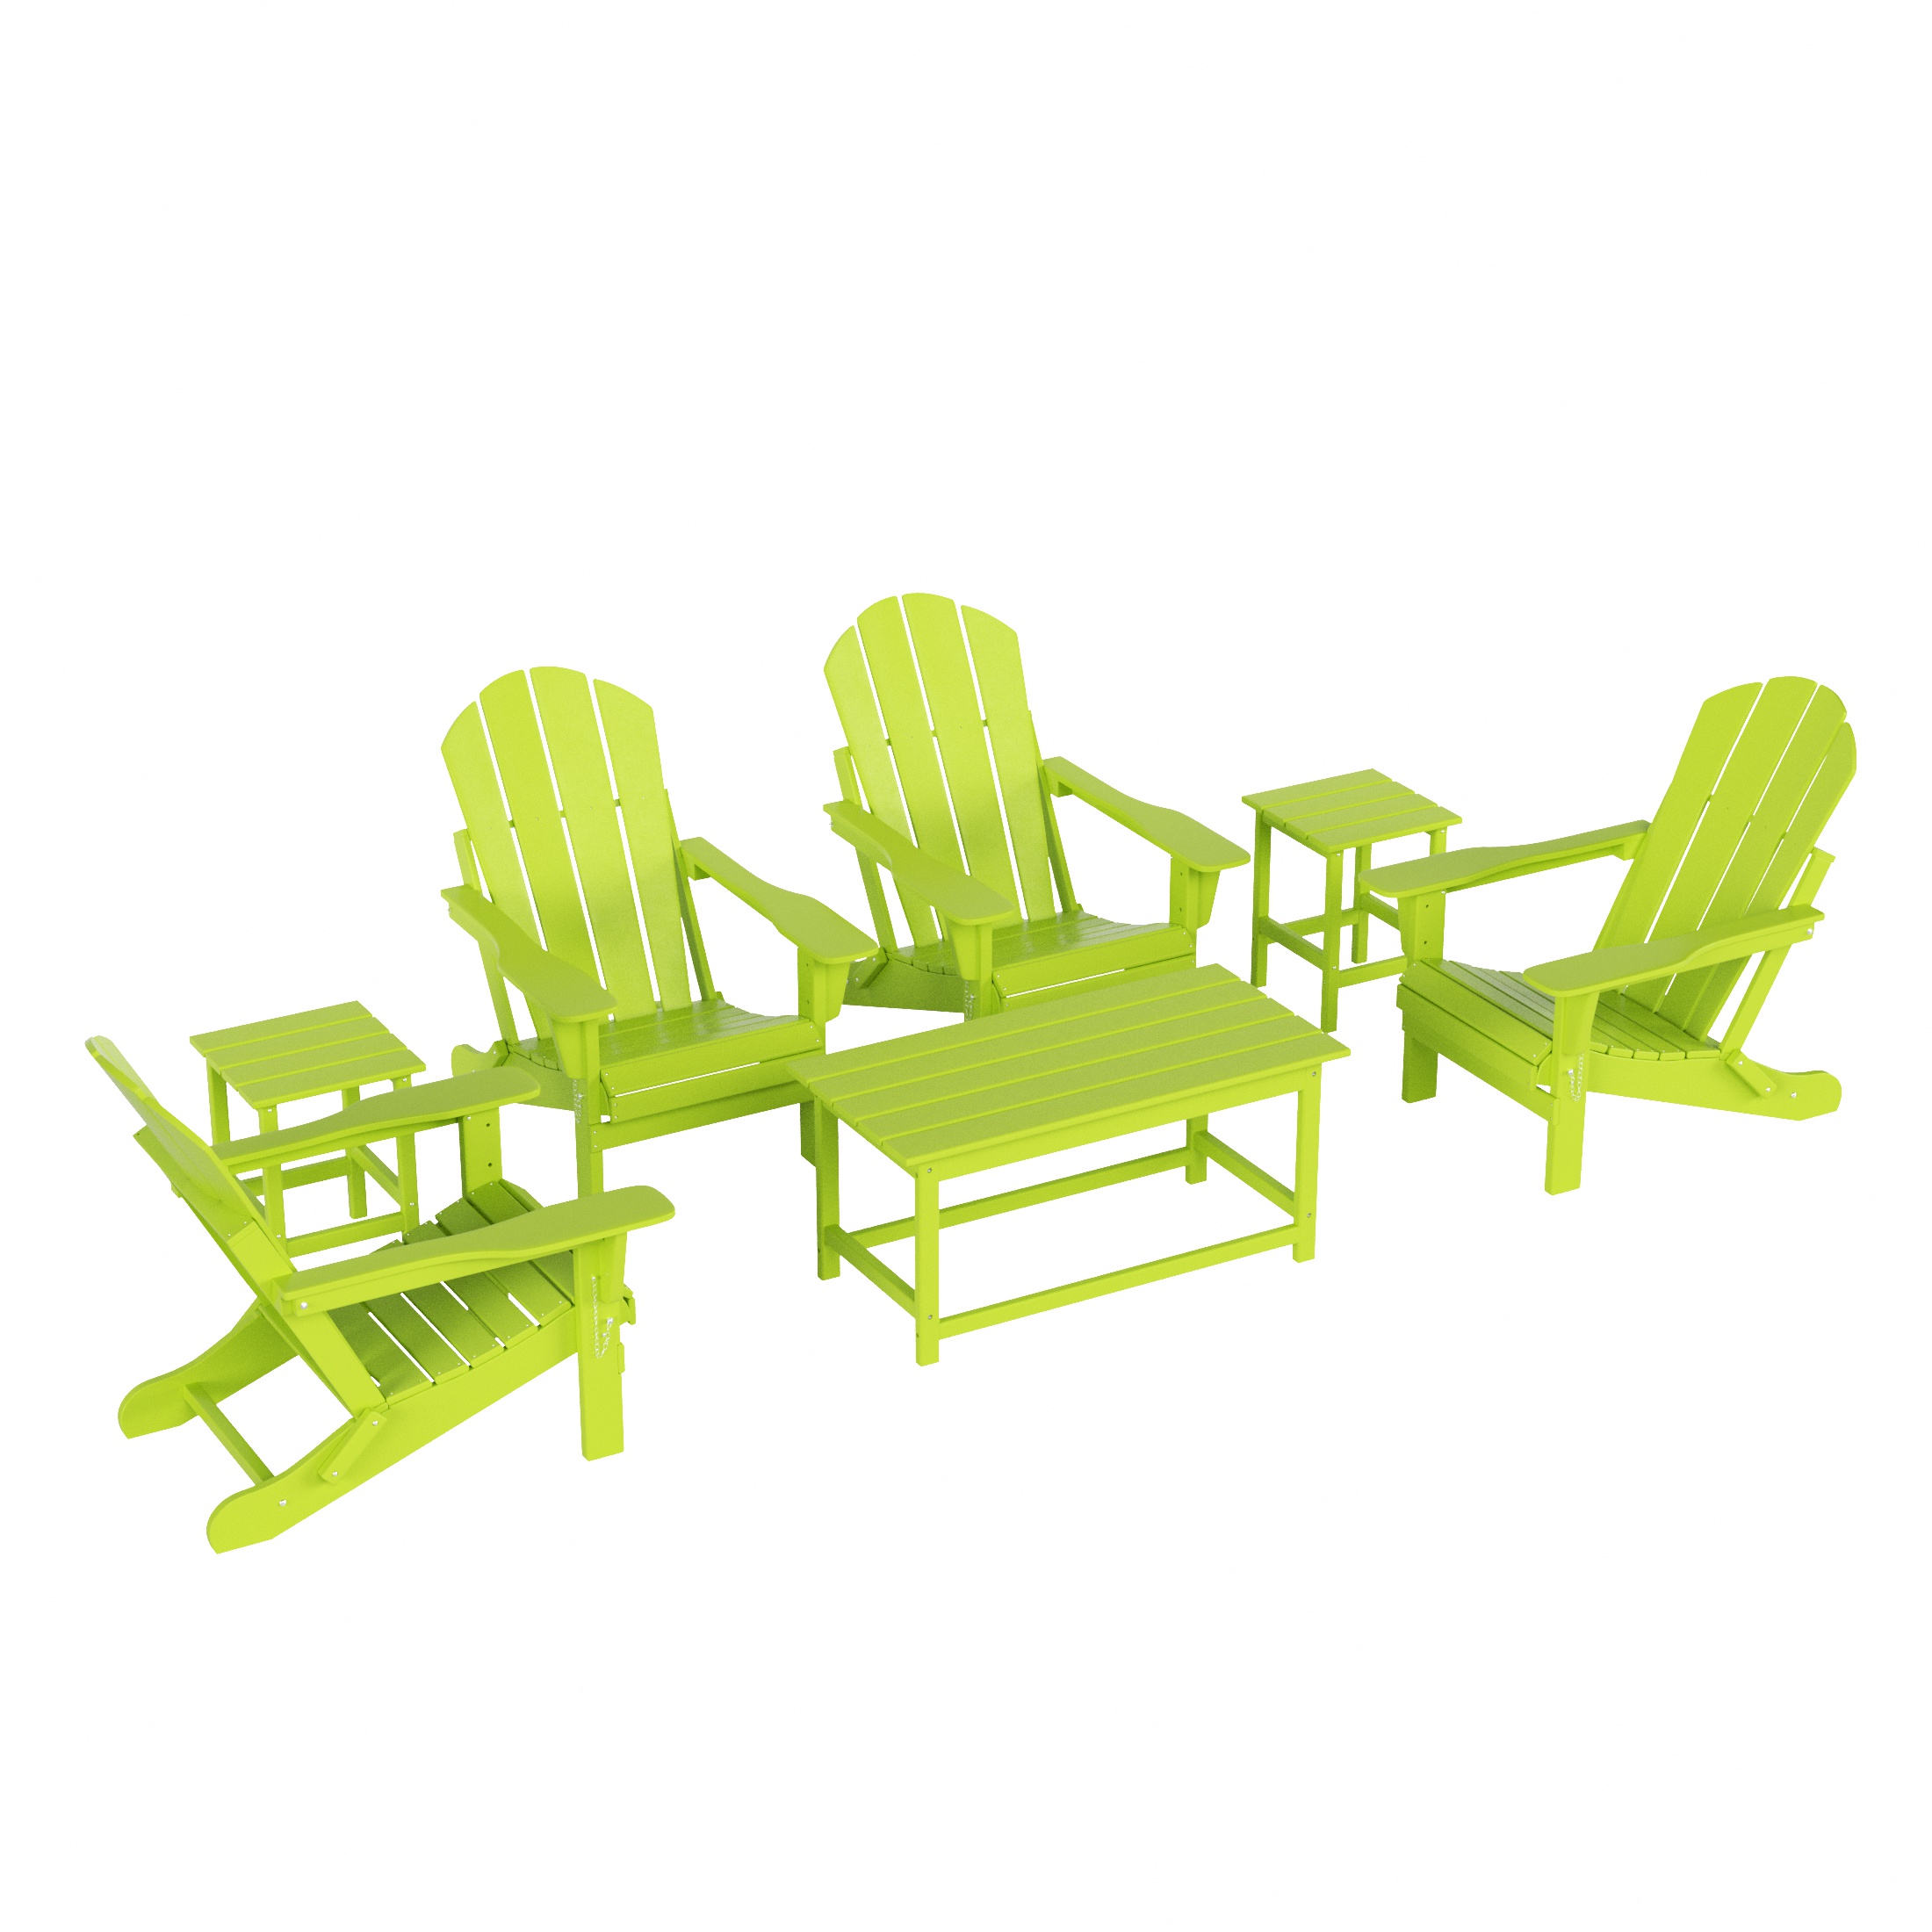 WestinTrends Malibu 7-Pieces Outdoor Patio Furniture Set, All Weather Outdoor Seating Plastic Adirondack Chair Set of 4, Coffee Table and 2 Side Table, Lime - image 1 of 7